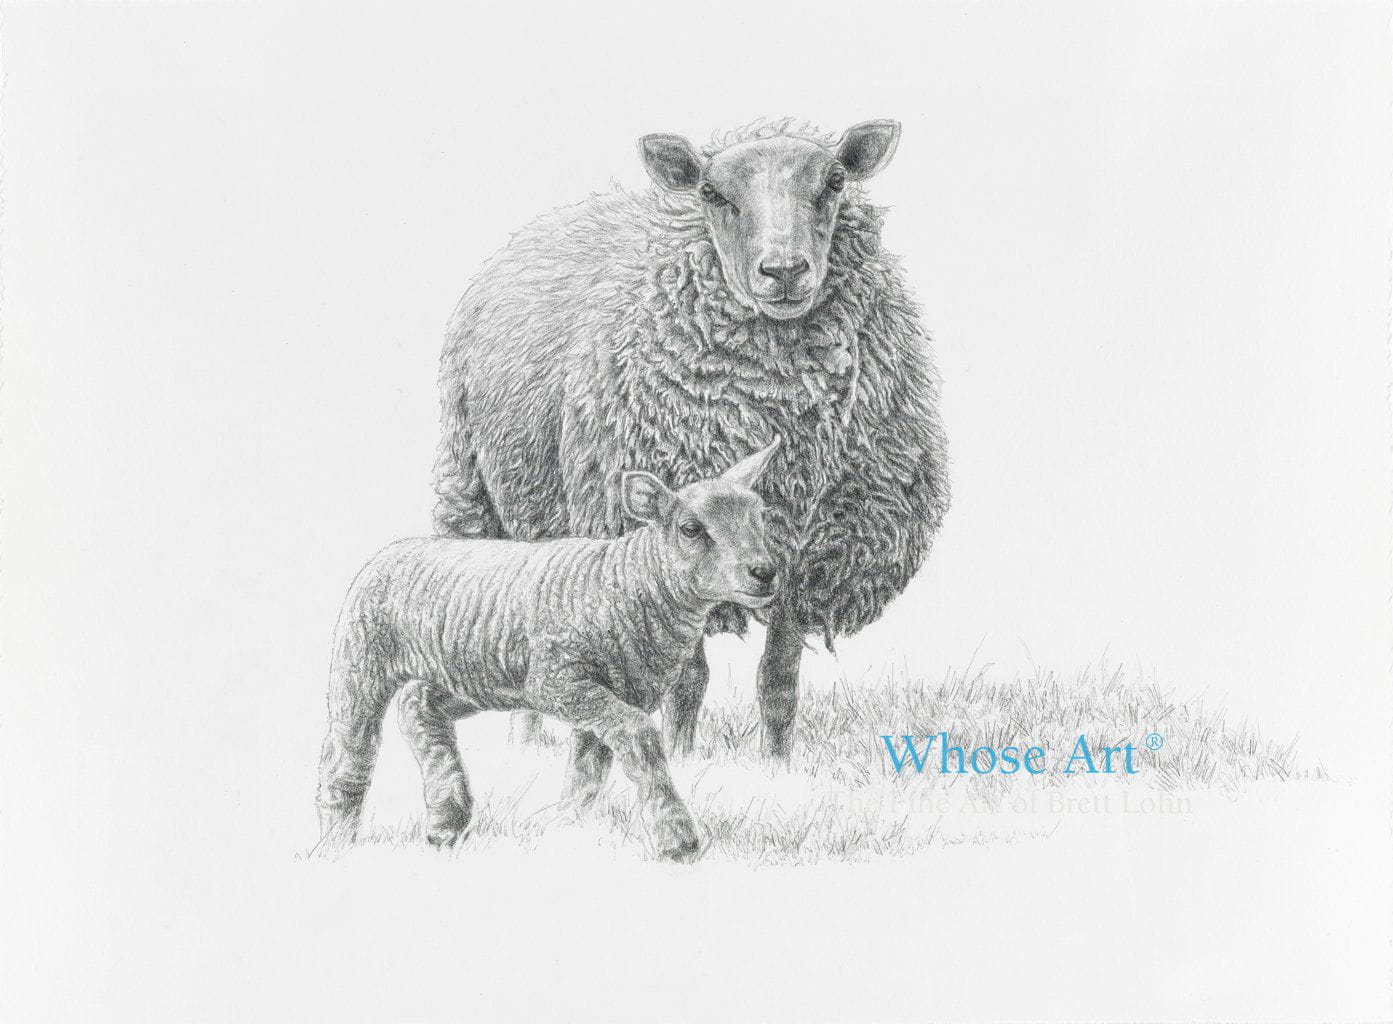 Lamb greeting card showing a drawing of a lamb with a sheep. The lamb is striding confidently in front of the sheep.